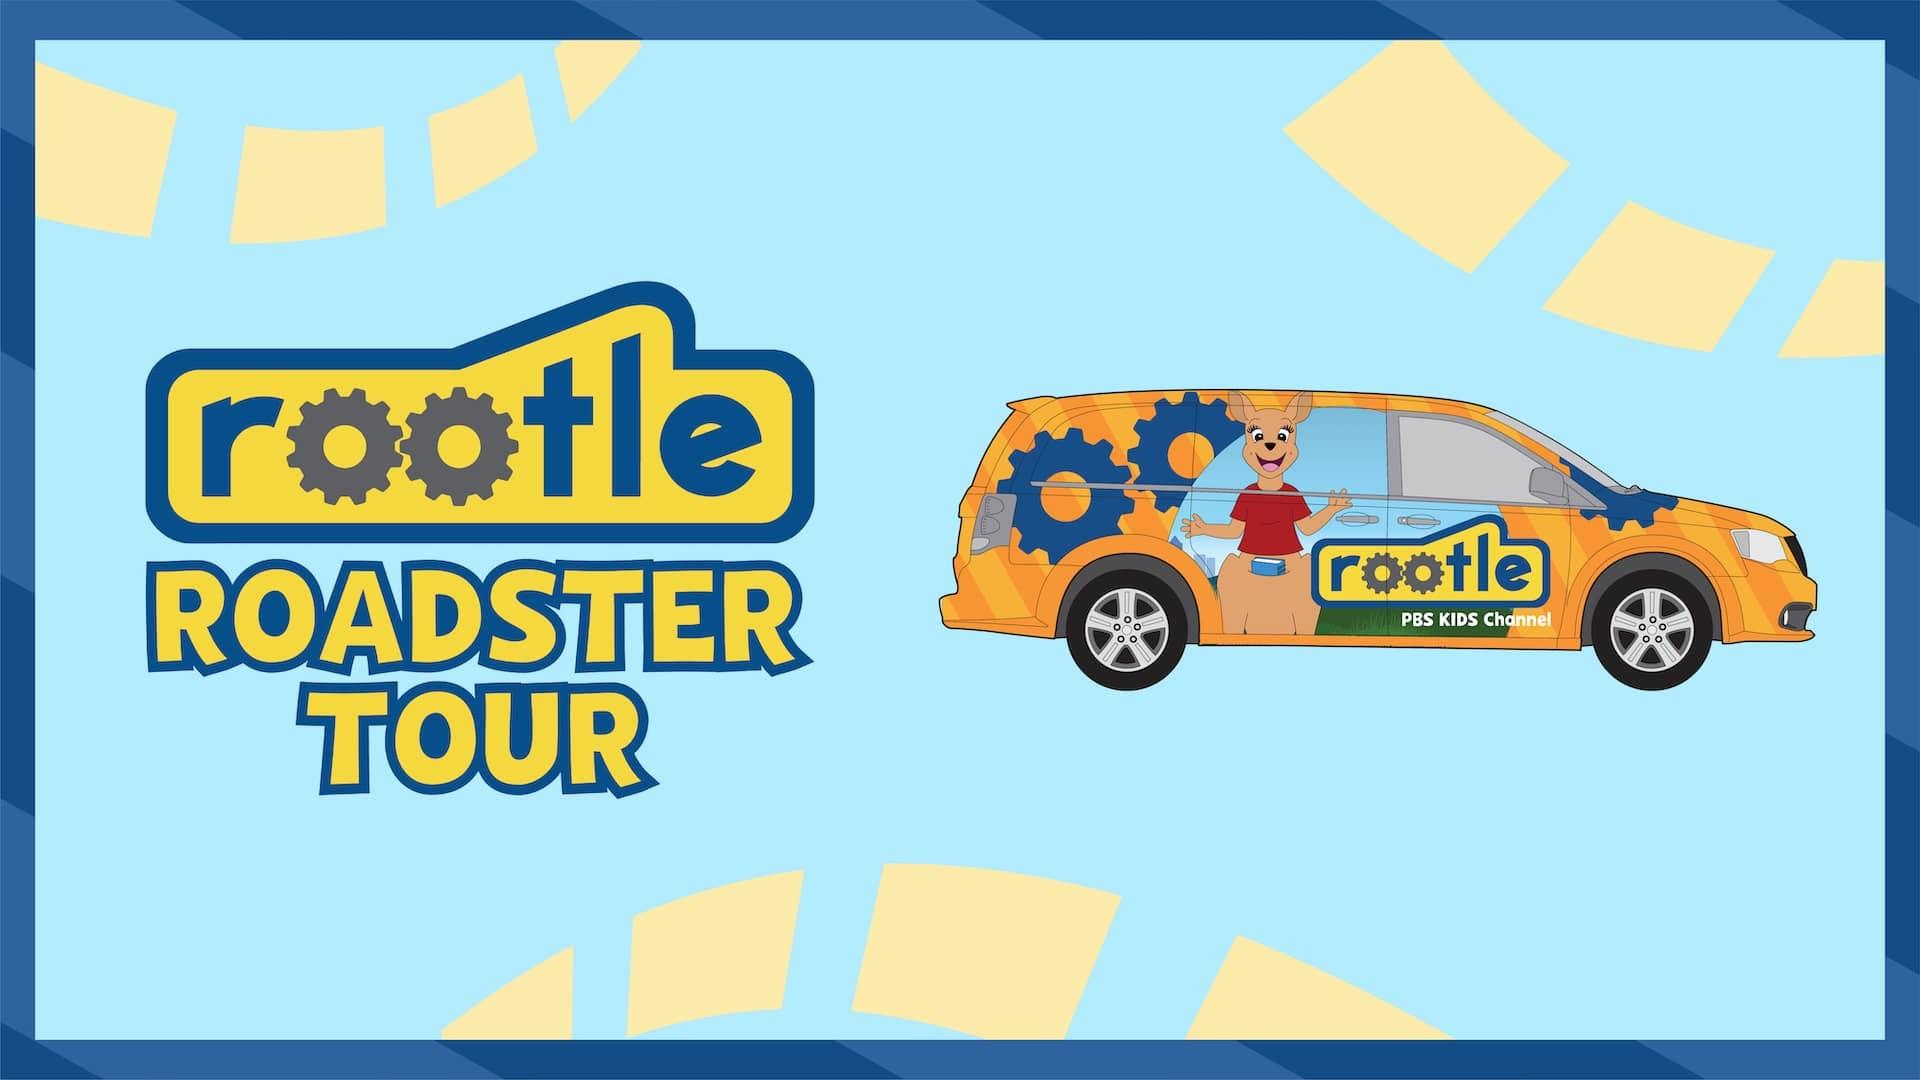 Rootle Roadster Tour graphic treatment featuring the Rootle van